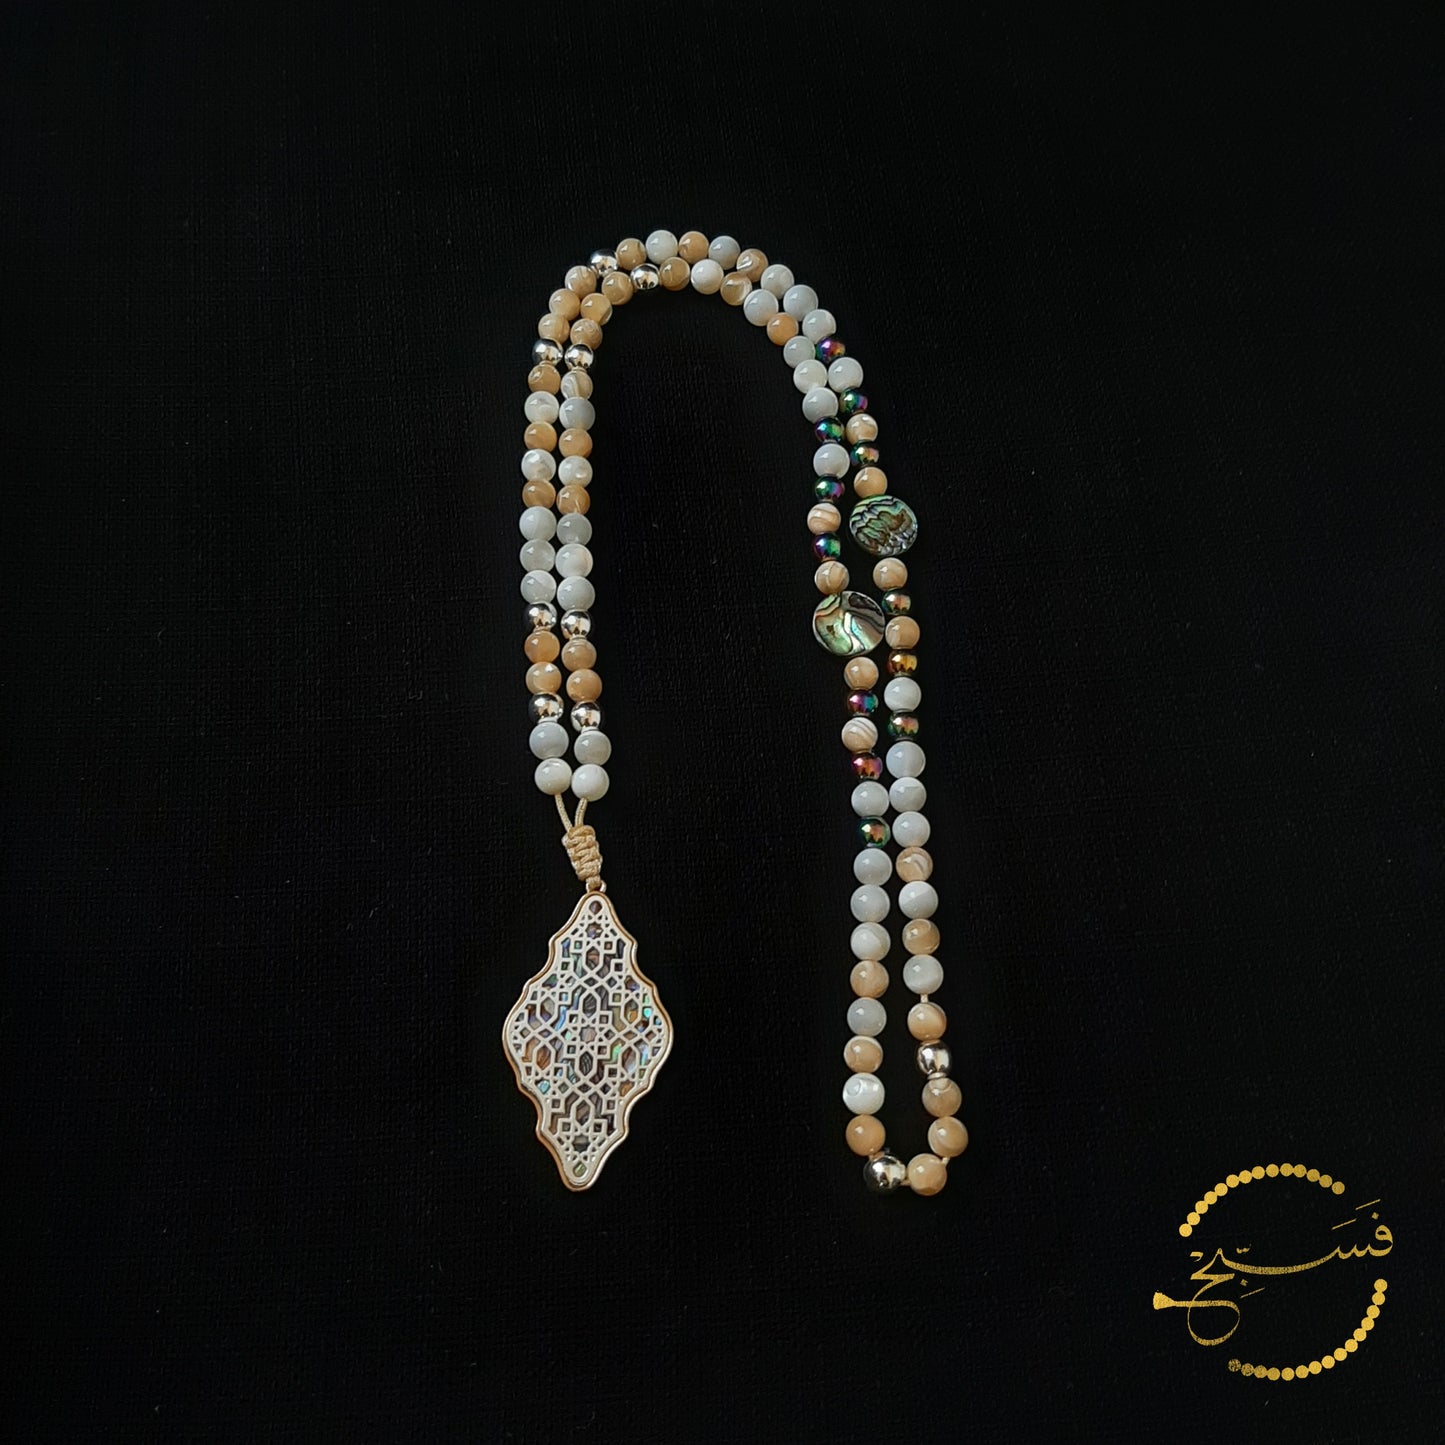 The geometric pattern, reminiscent of Islamic art, over an abalone shell makes a really attractive, silver-finish, pendant. White and caramel shades of trochus shell beads contrast beautifully with the greens of the abalone and hematite beads used sparingly in this tasbih.    Packaged in a luxurious pouch and a gift box.  99 beads